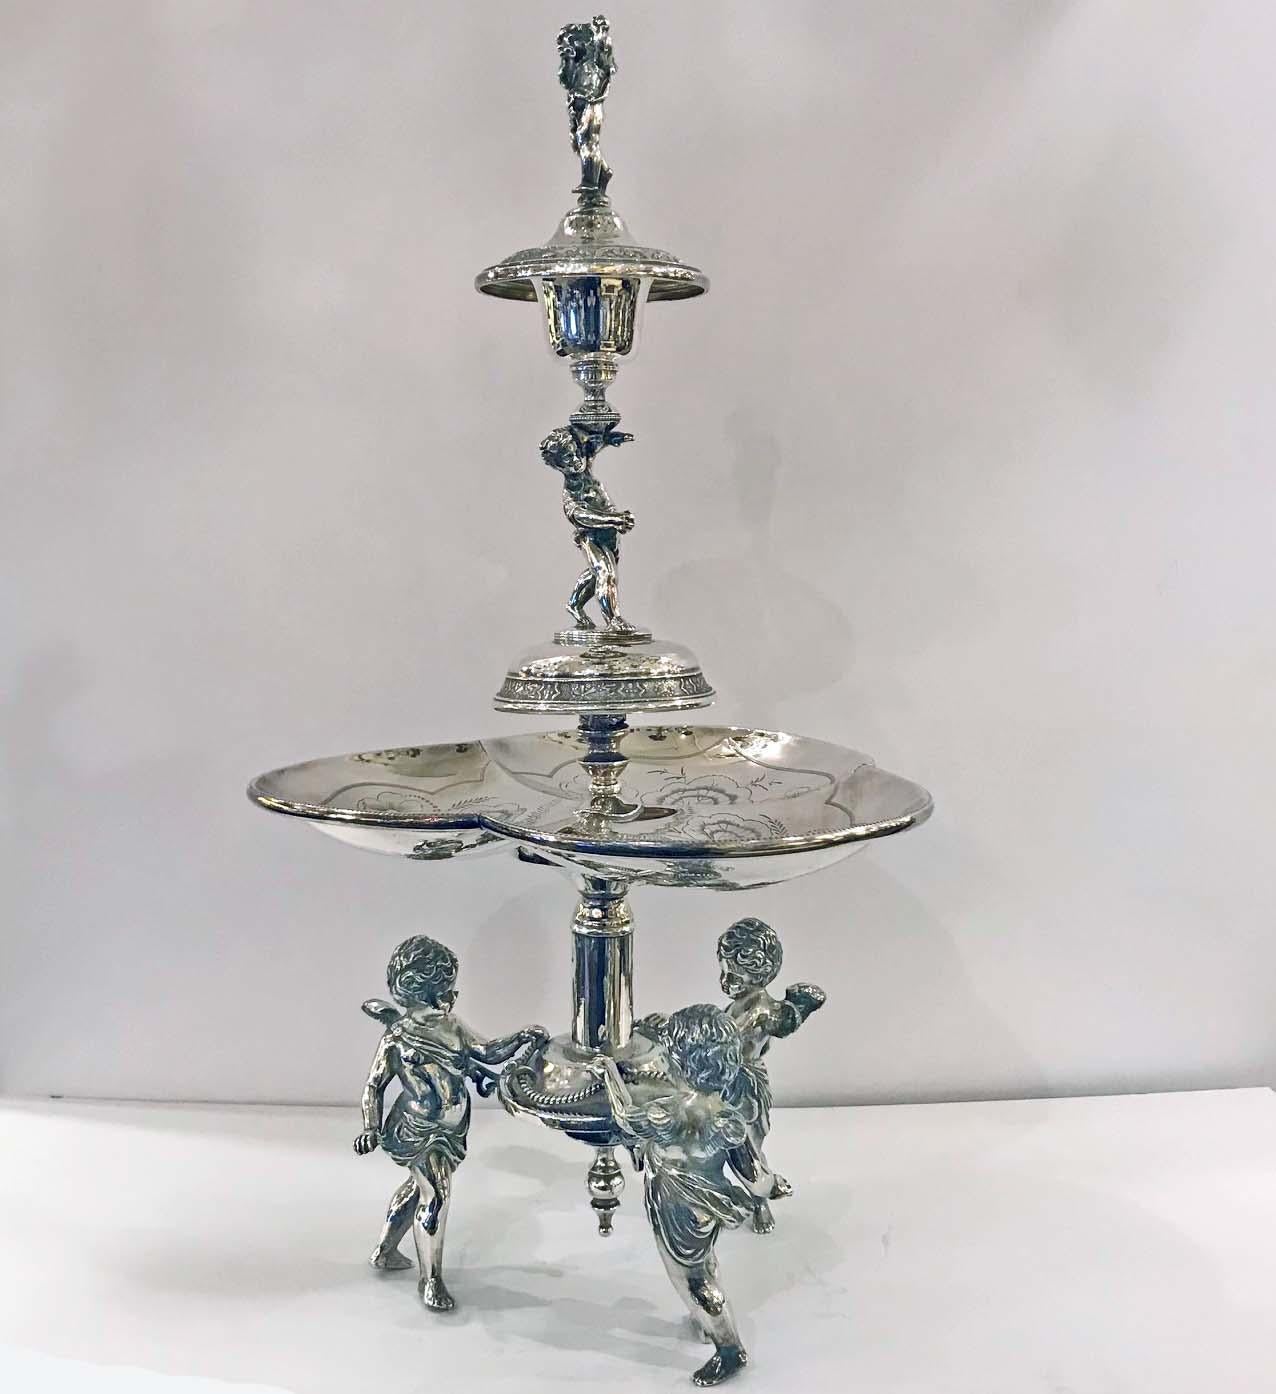 This exuberant centerpiece is a playful addition to your dinner table. The central trilobed dish is hand-engraved with flowers and supported by three frolicing cherubs. The elaborate finial is surmounted by a cherub sounding a blast on a horn: he is